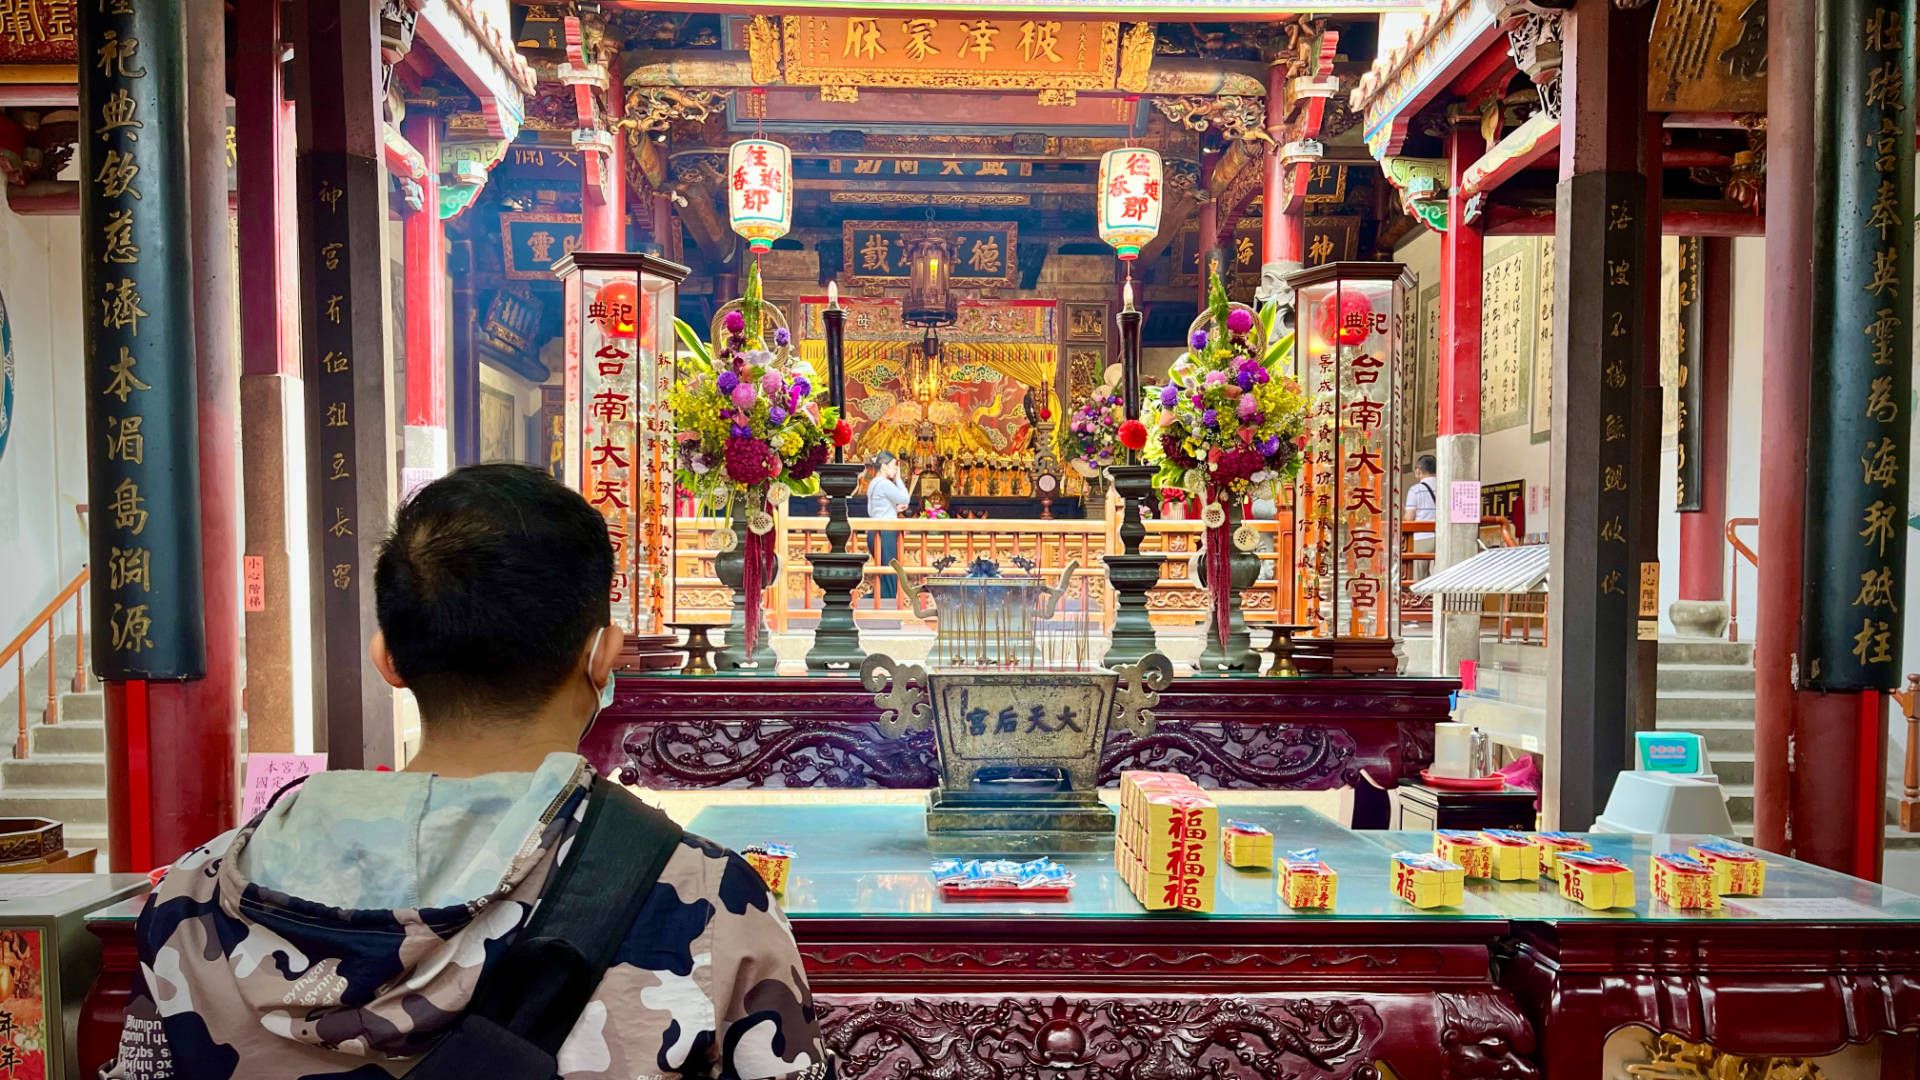 Two people praying inside a temple.